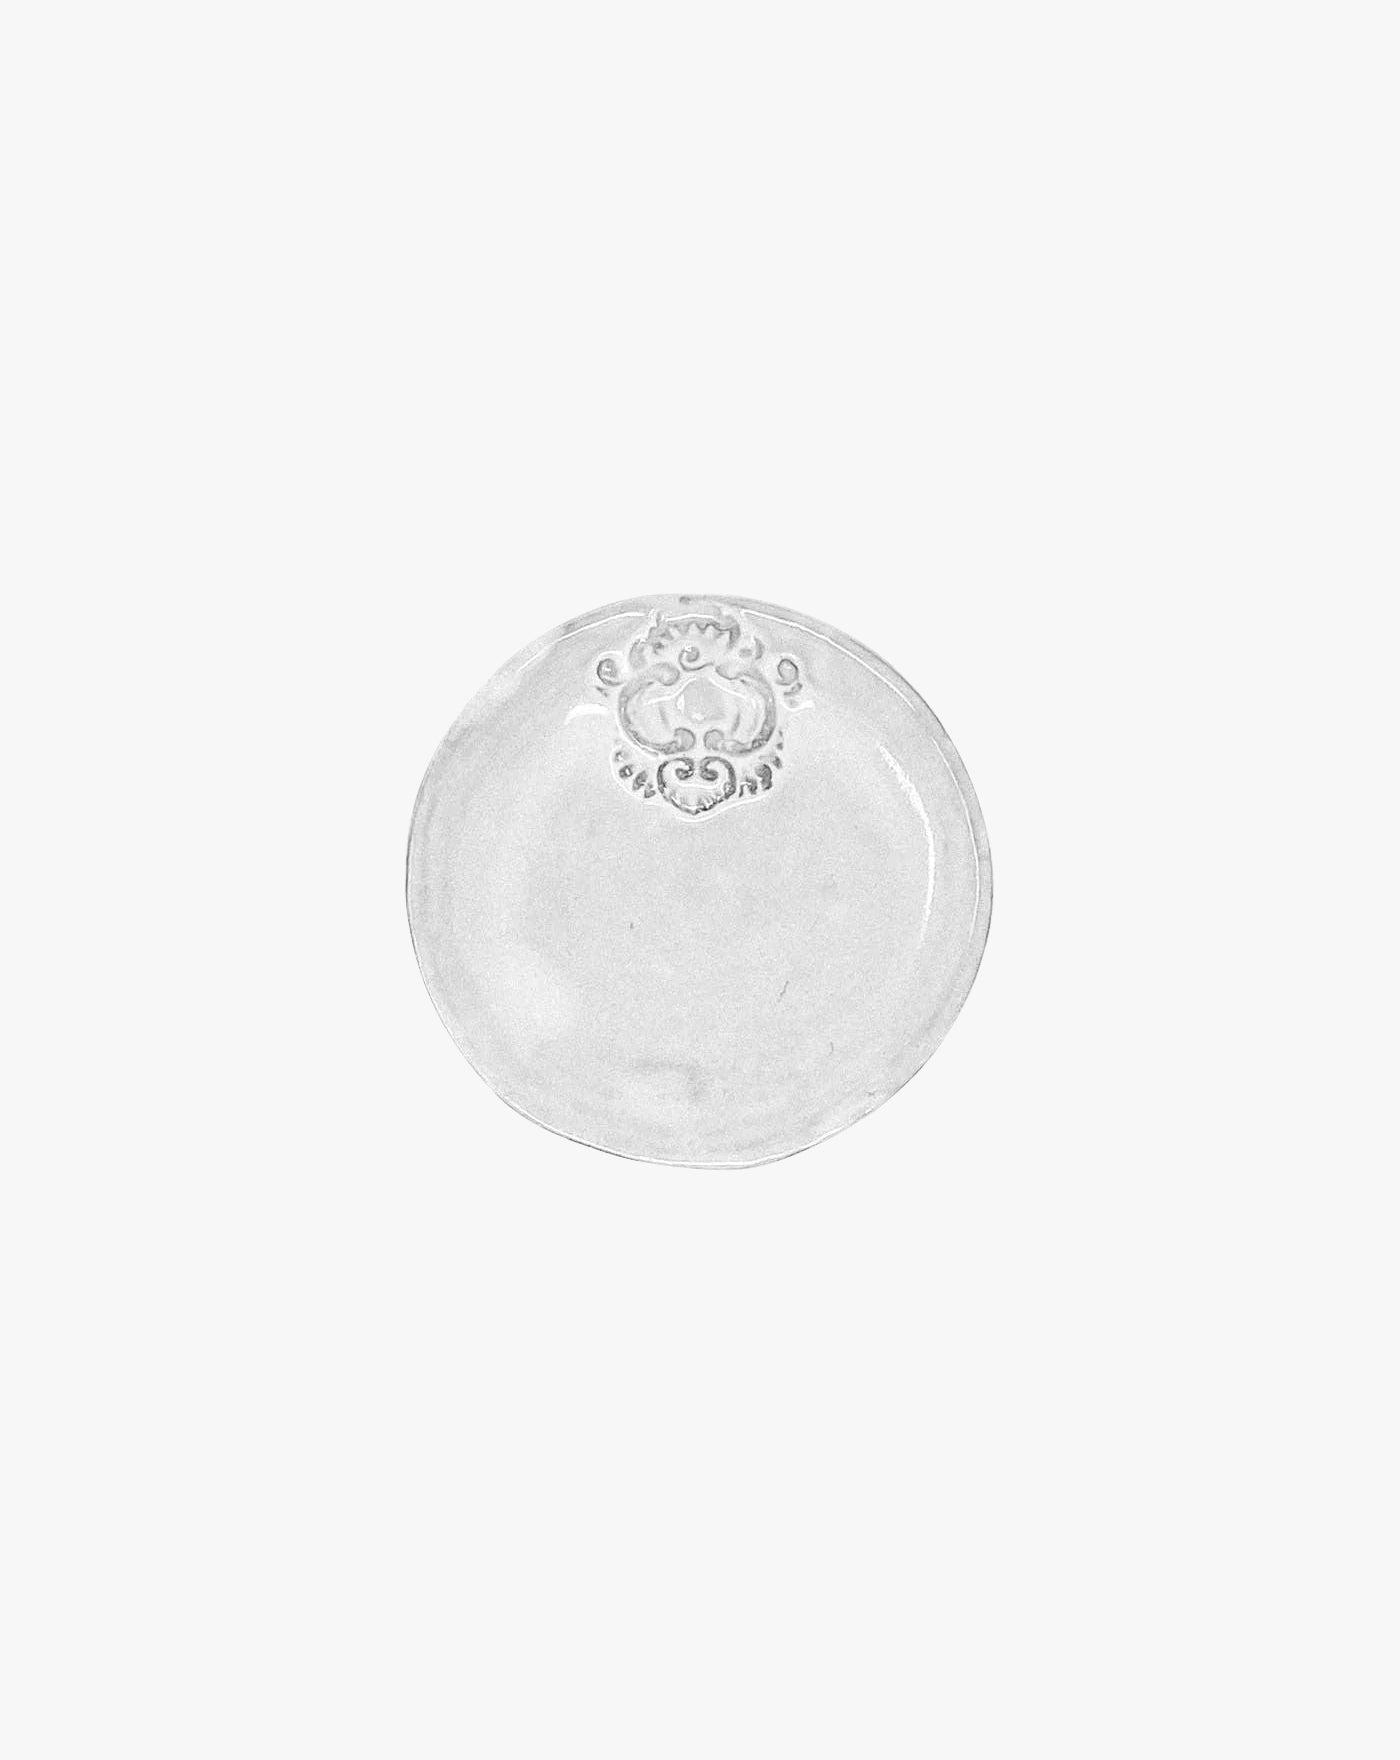 A transparent glass soup plate with an intricate, decorative frosted design in the center, elegantly embossed, seen from above against a white background.
Product Name: Charles Plate
Brand Name: Carron